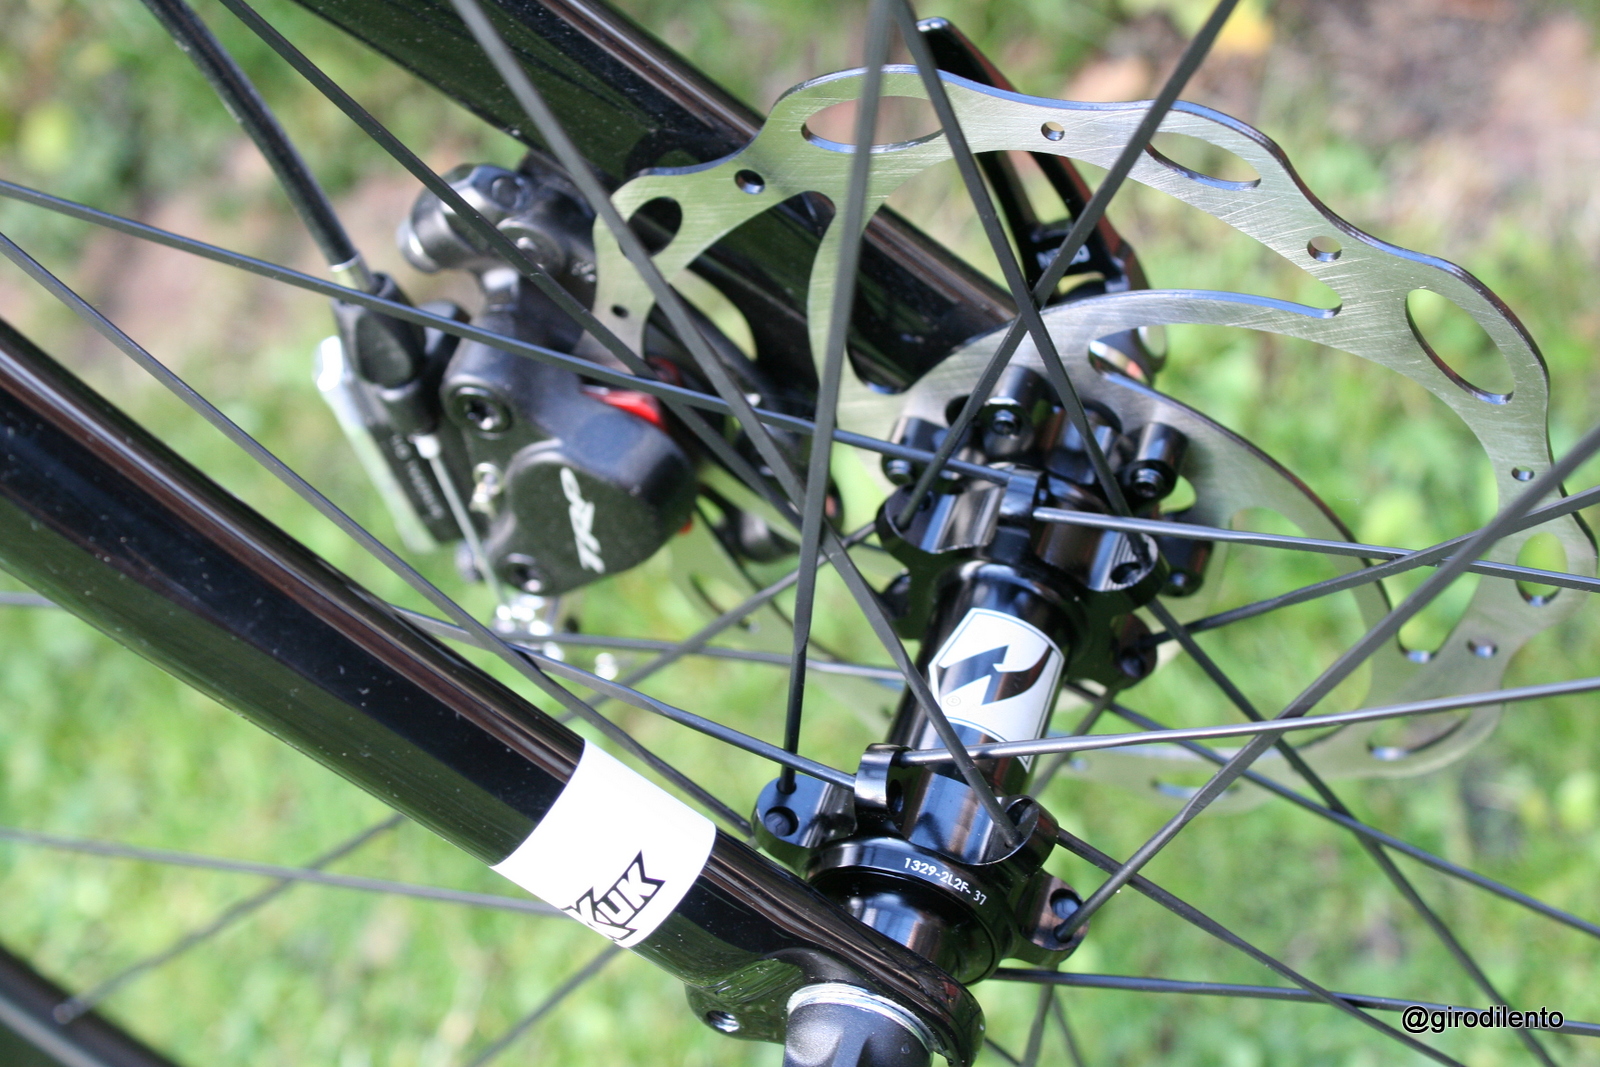 A glimpse of the disc specific Reynolds hub for the Assault SLG Disc